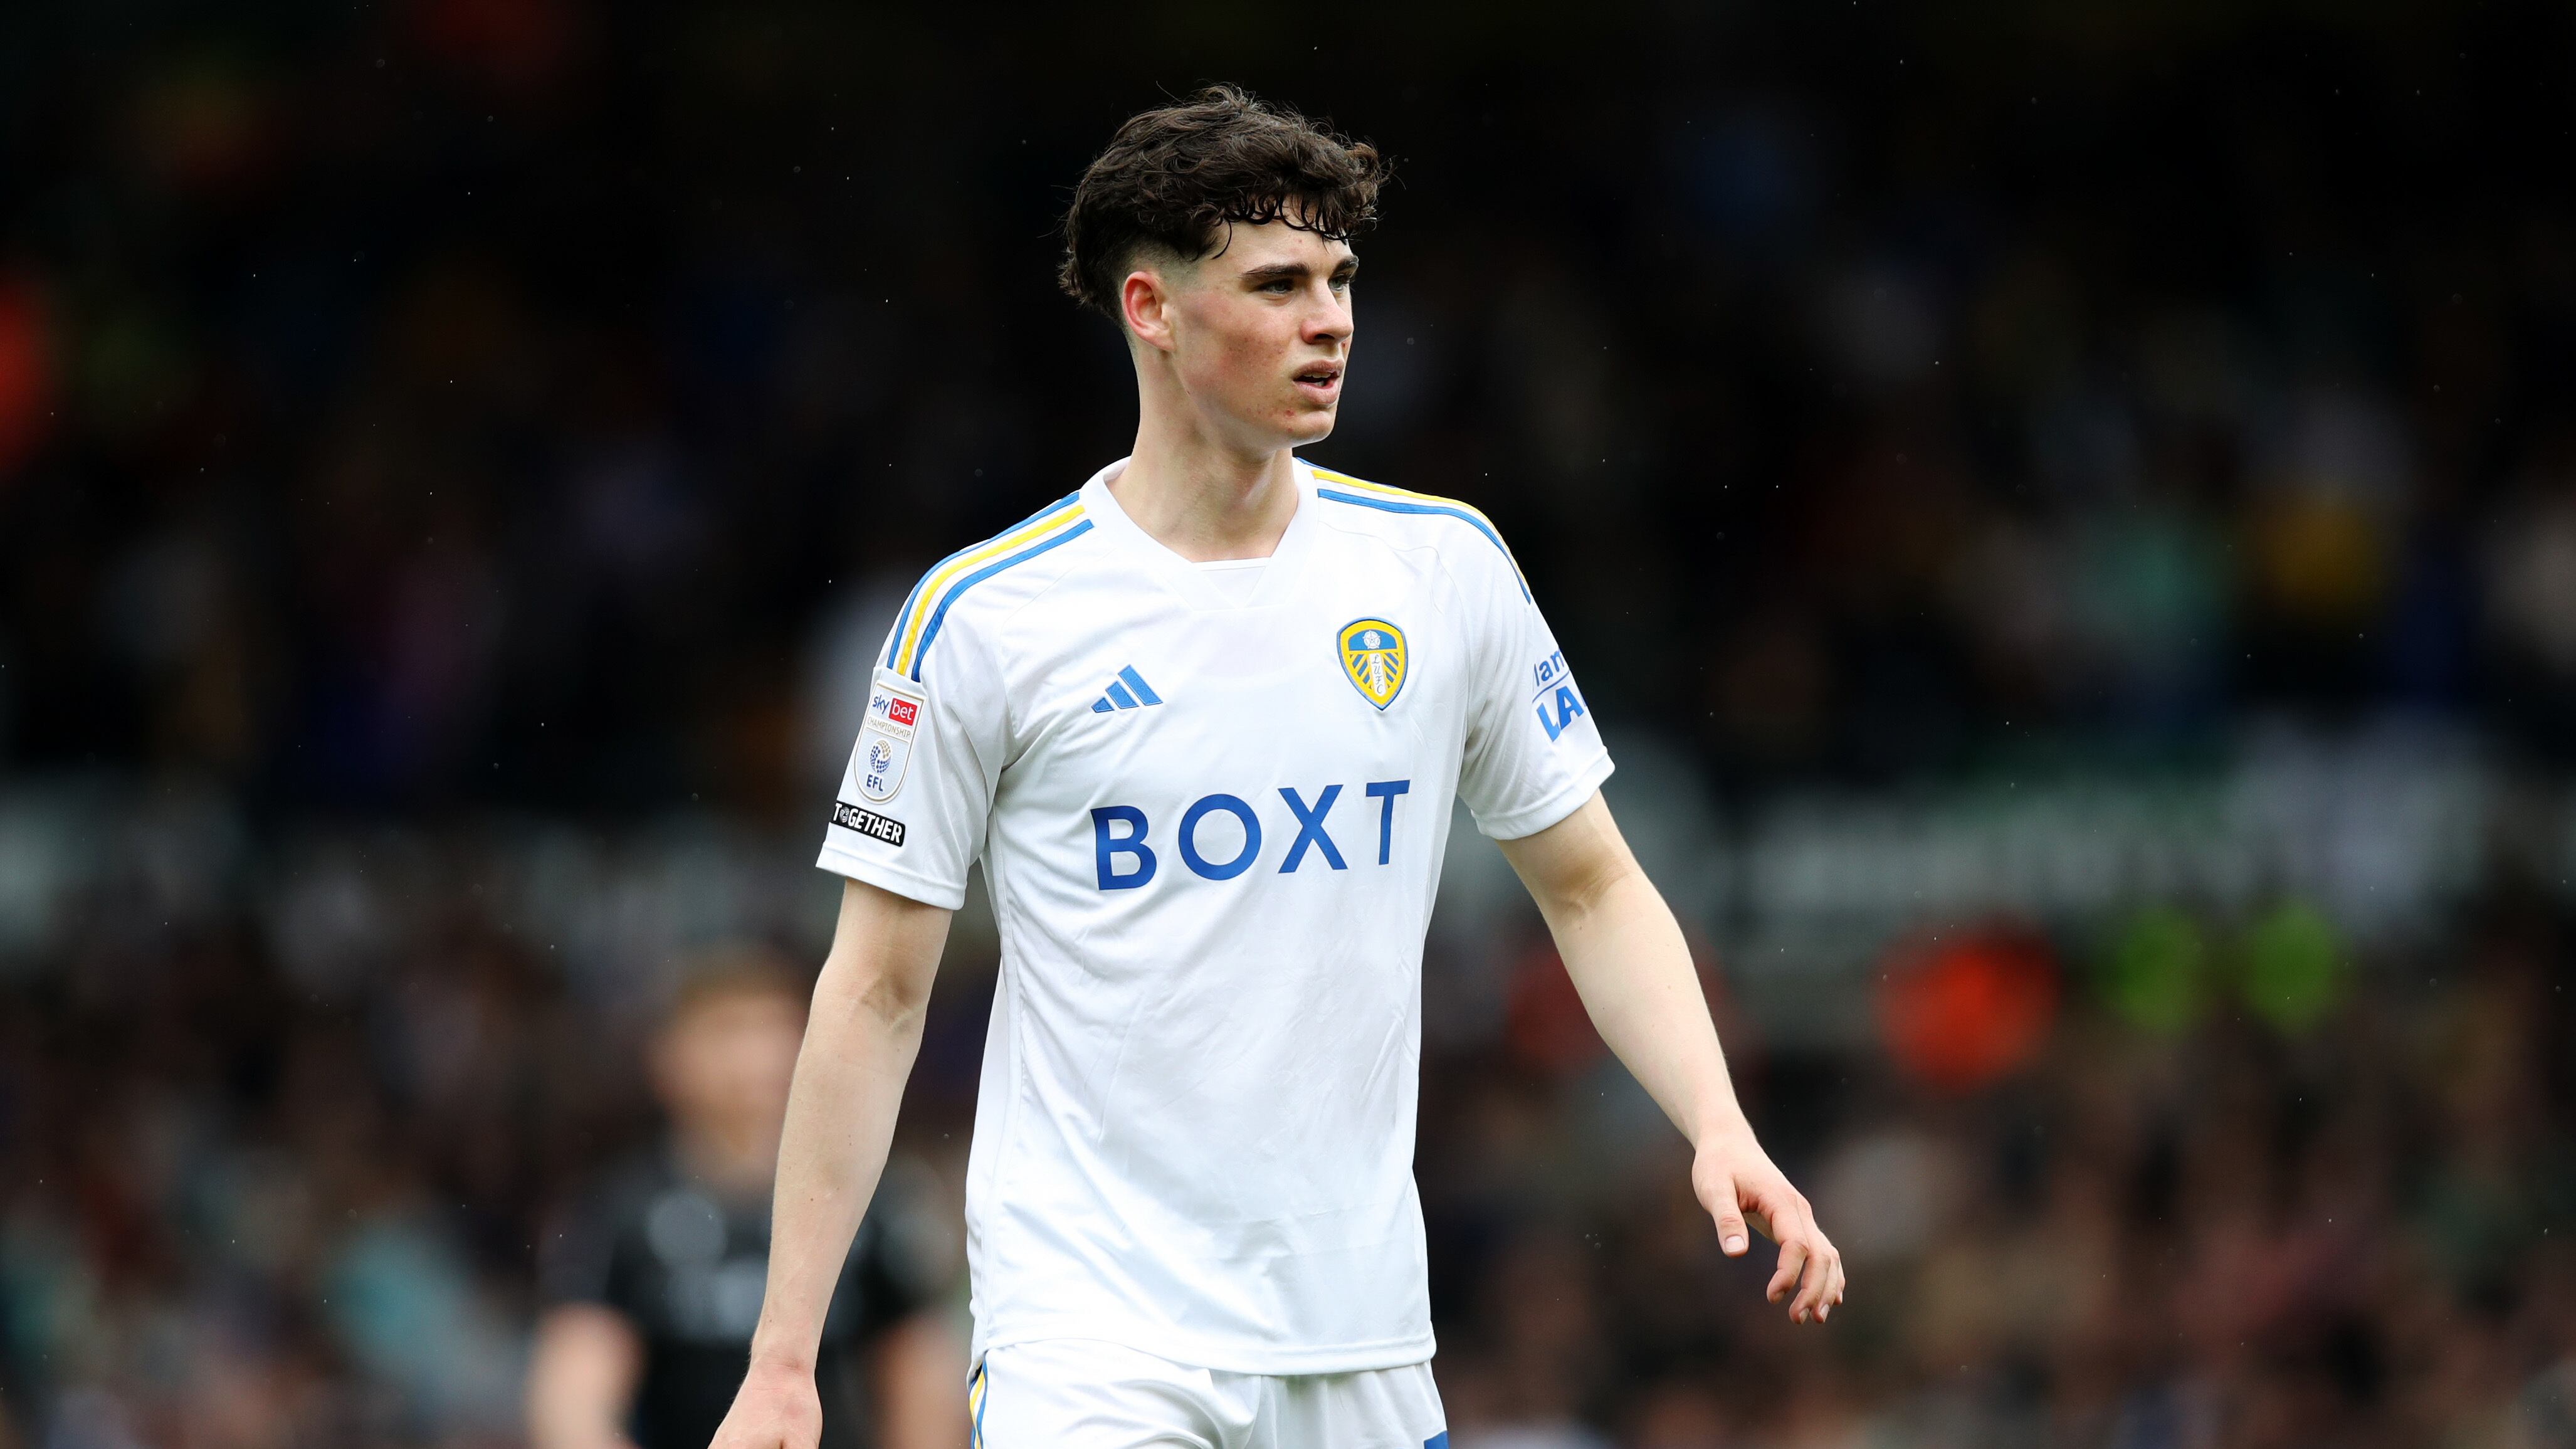 Archie Gray helped Leeds reach the Sky Bet Championship play-off final last season